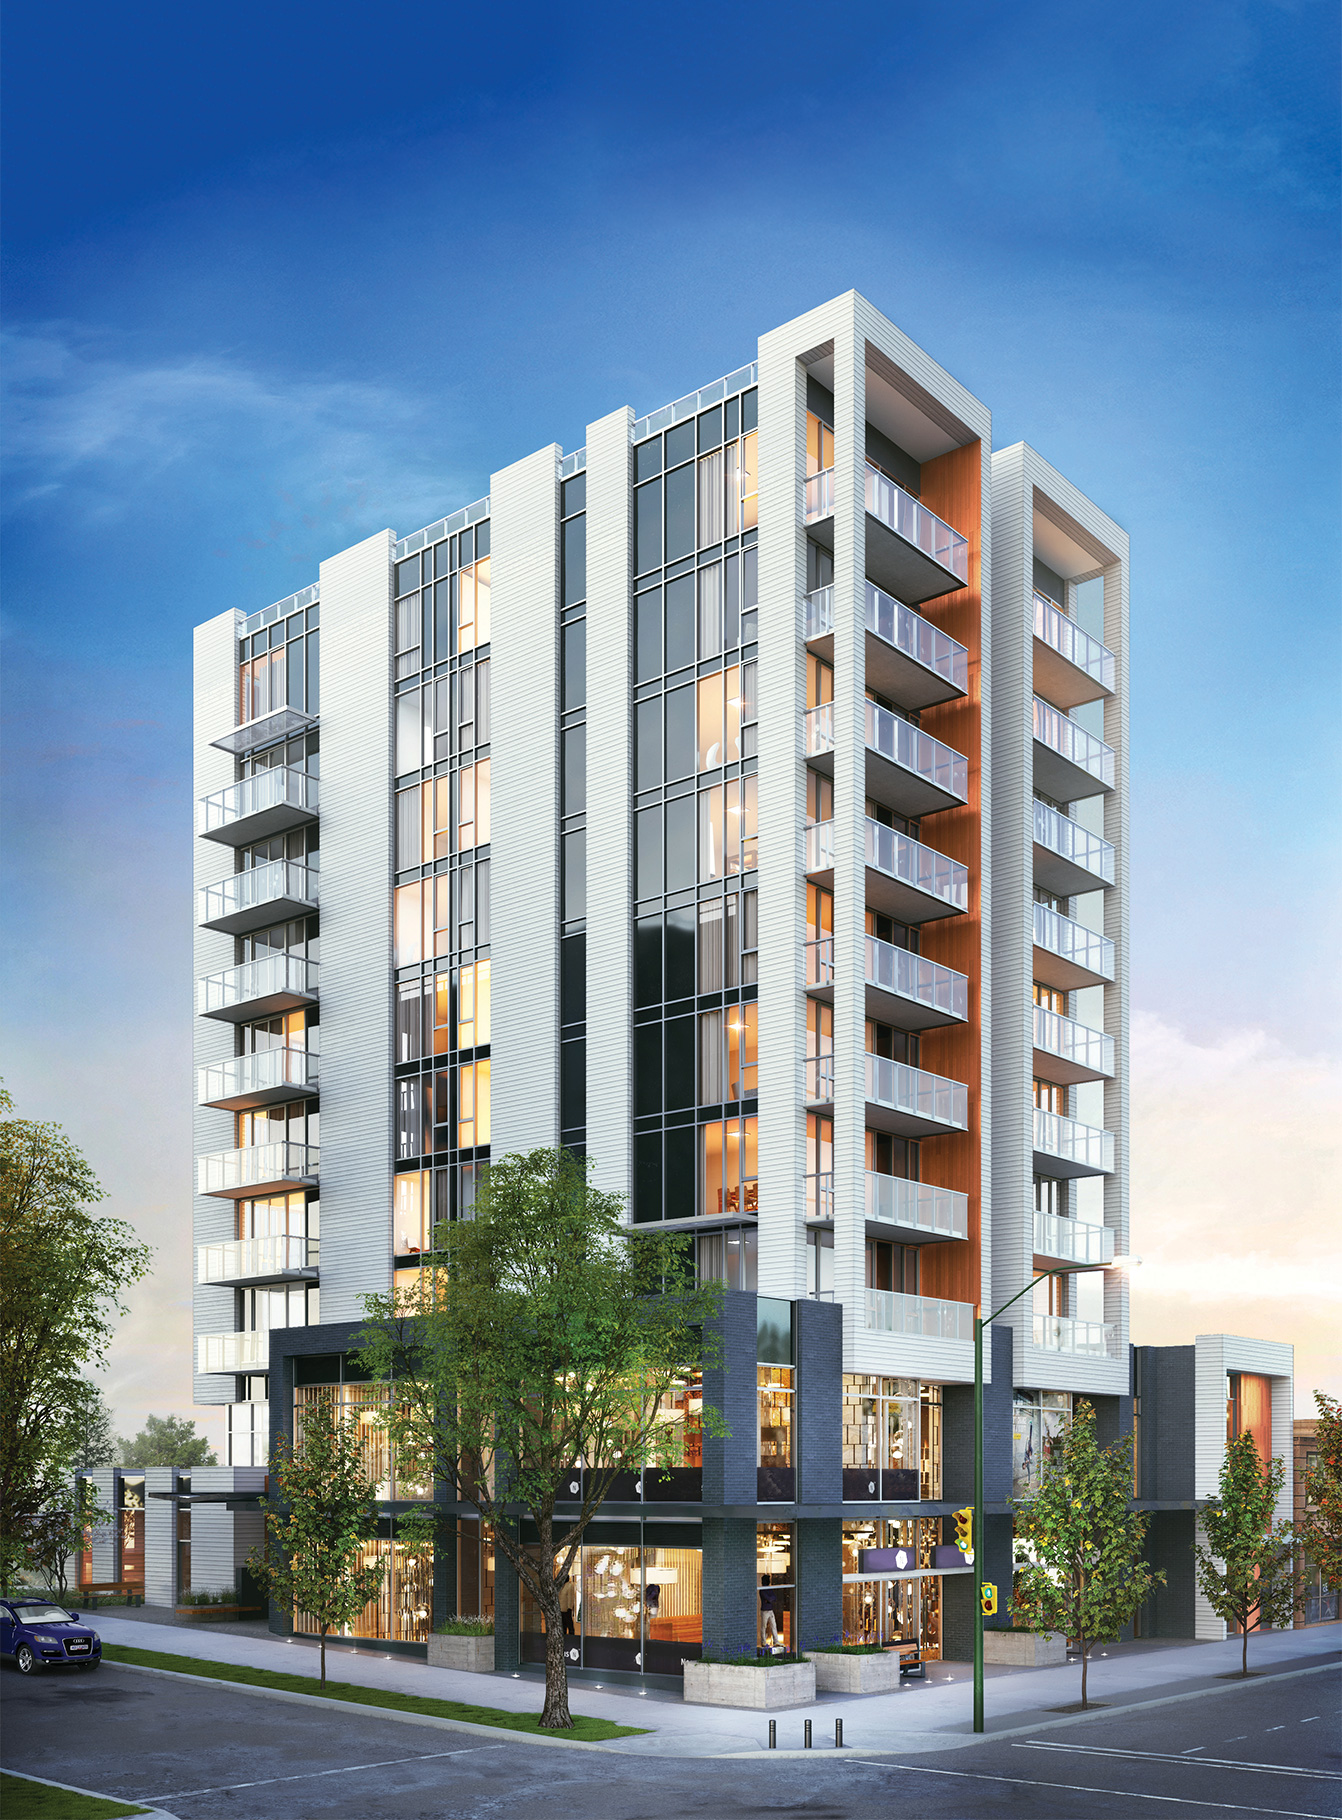 Duet Vancouver by Minglian – Prices, Availability, Plans